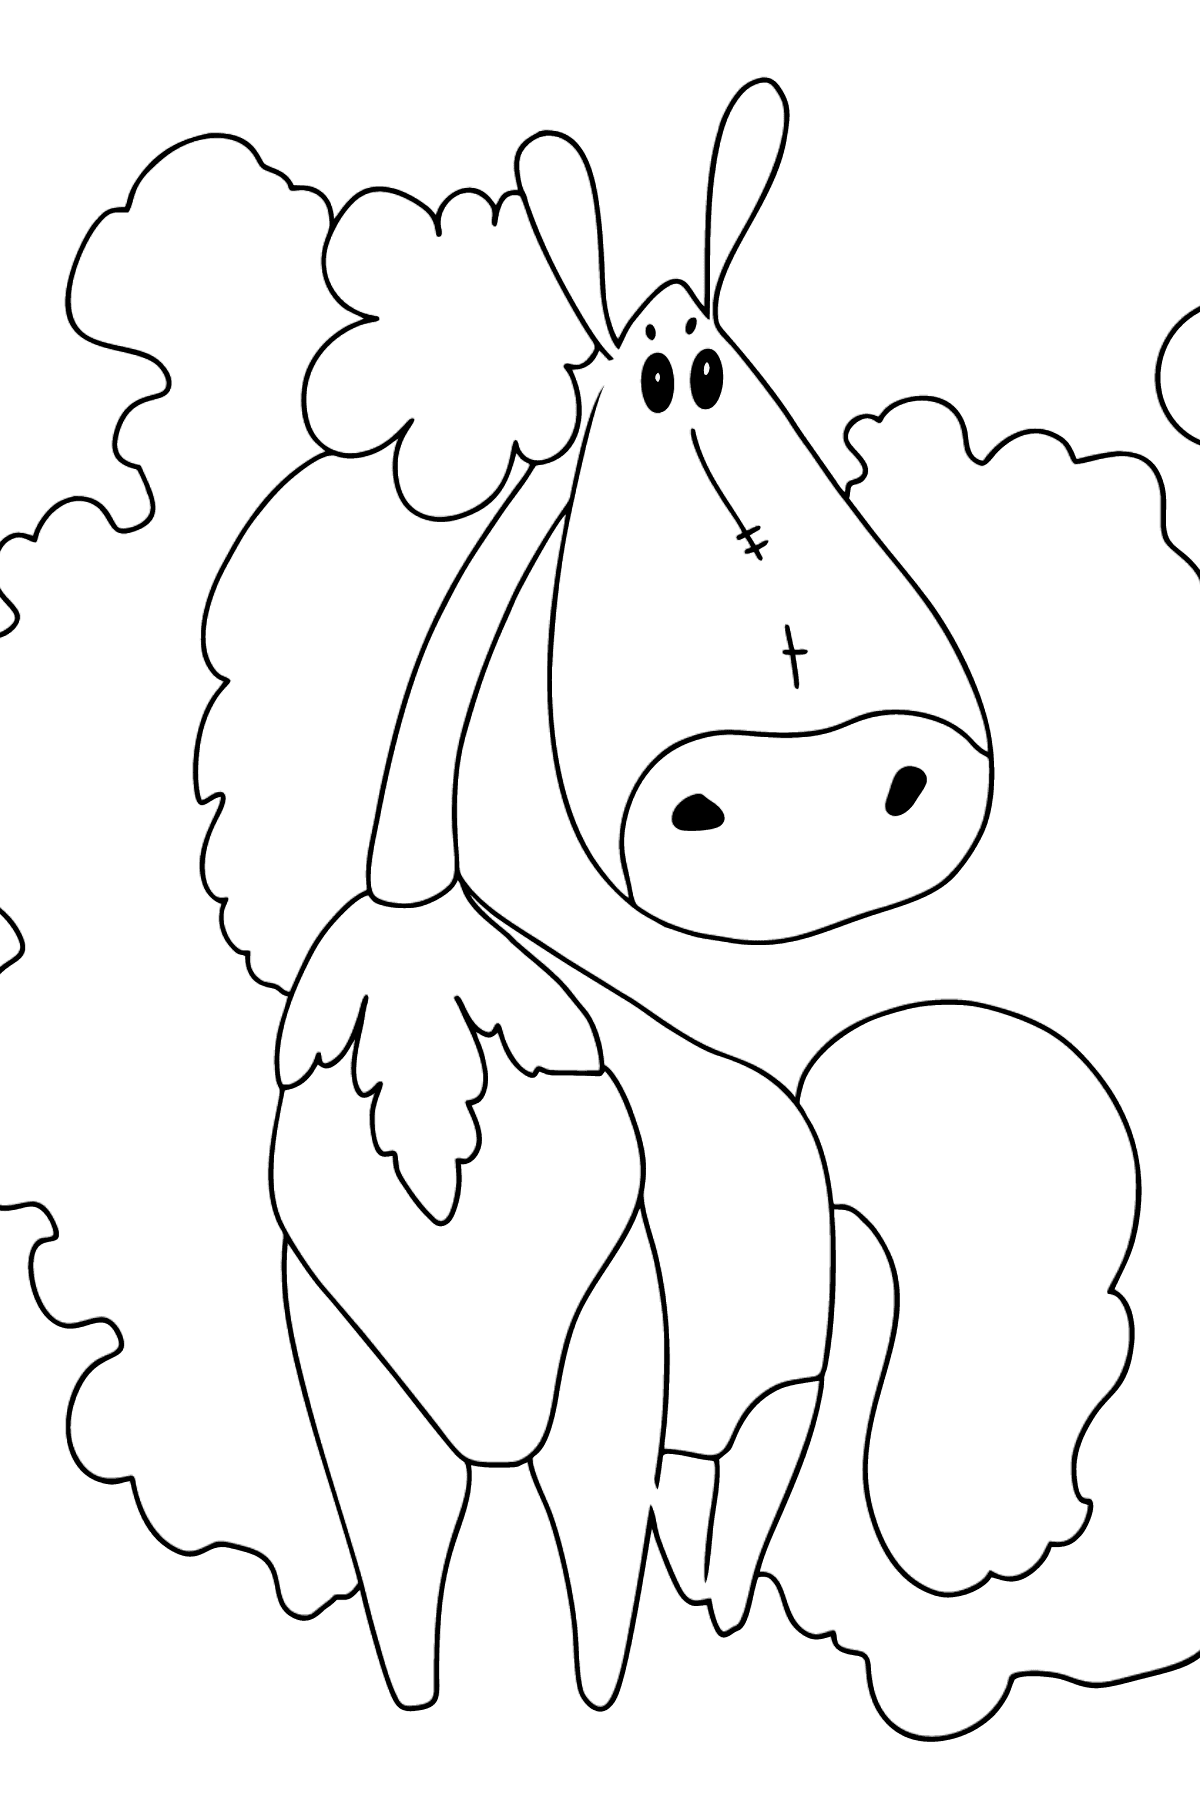 Simple coloring page a horse fashionista - Coloring Pages for Kids